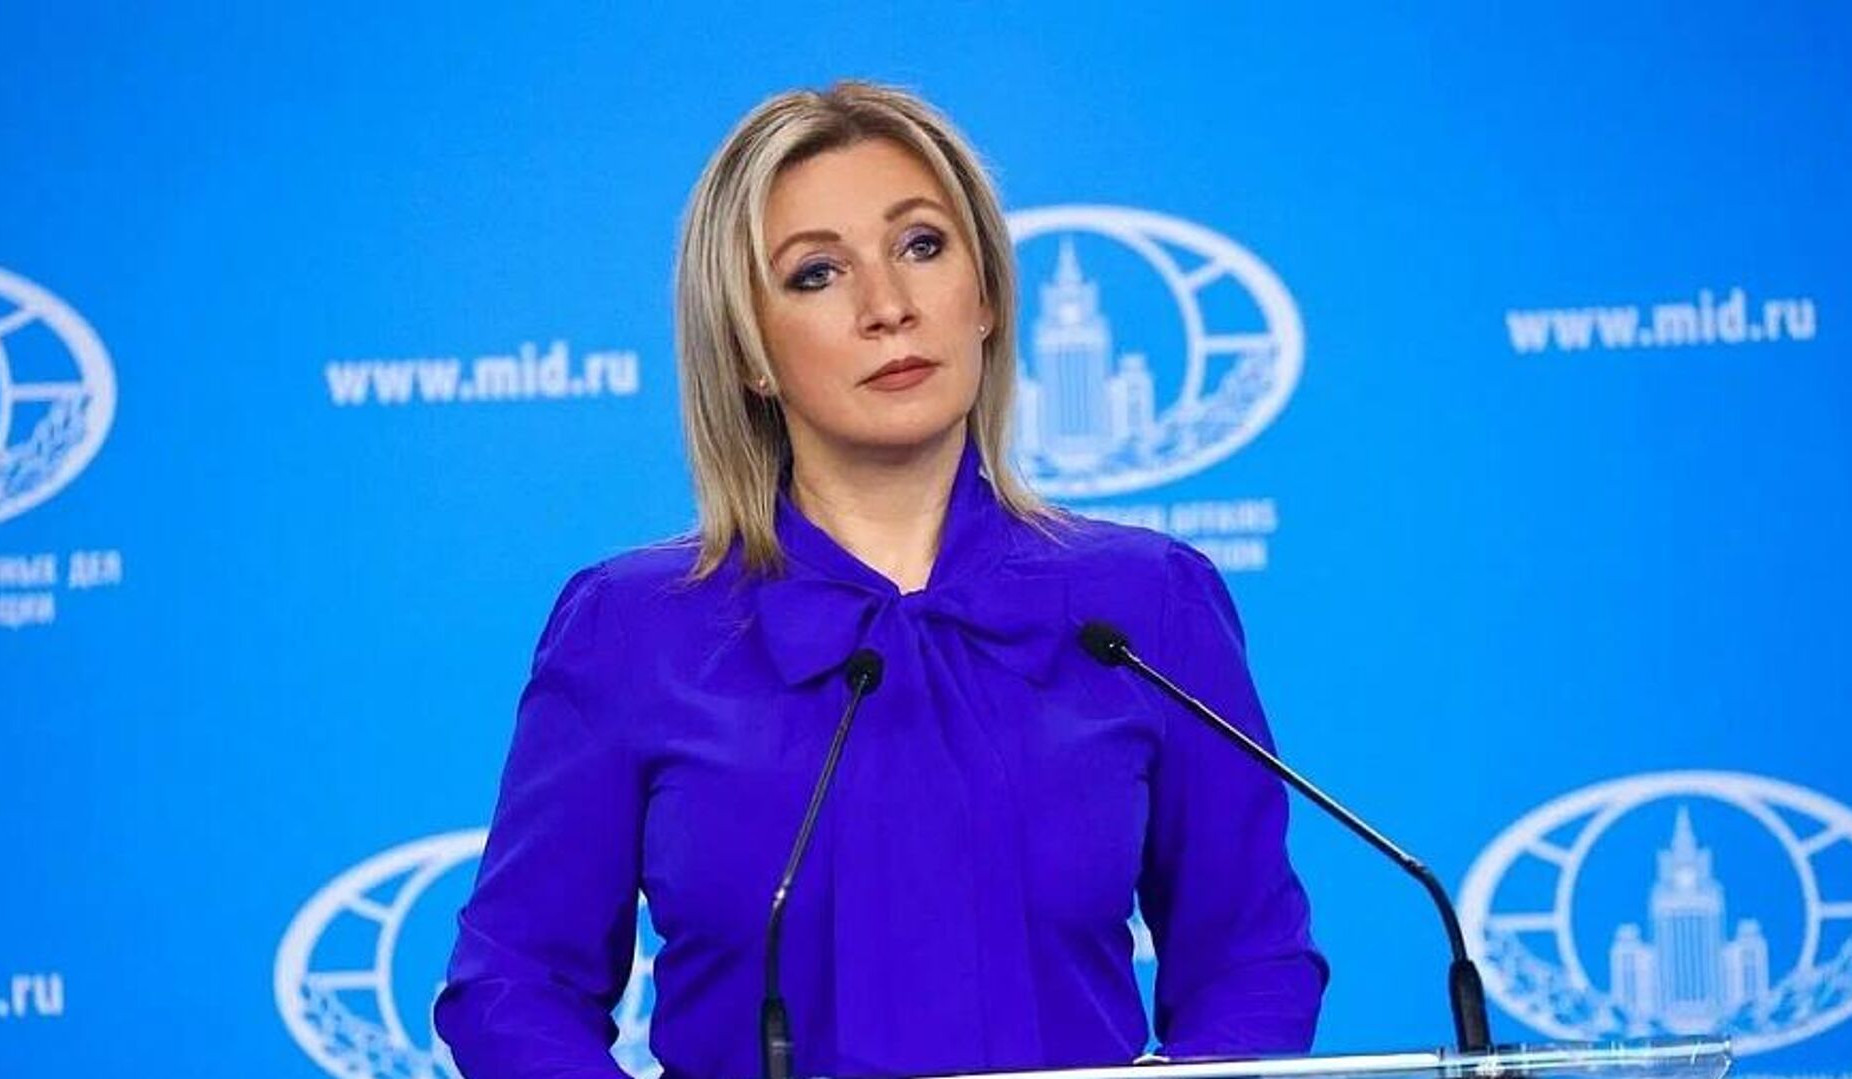 Moscow will not participate in financing of US-imposed group in Organization for the Prohibition of Chemical Weapons: Zakharova